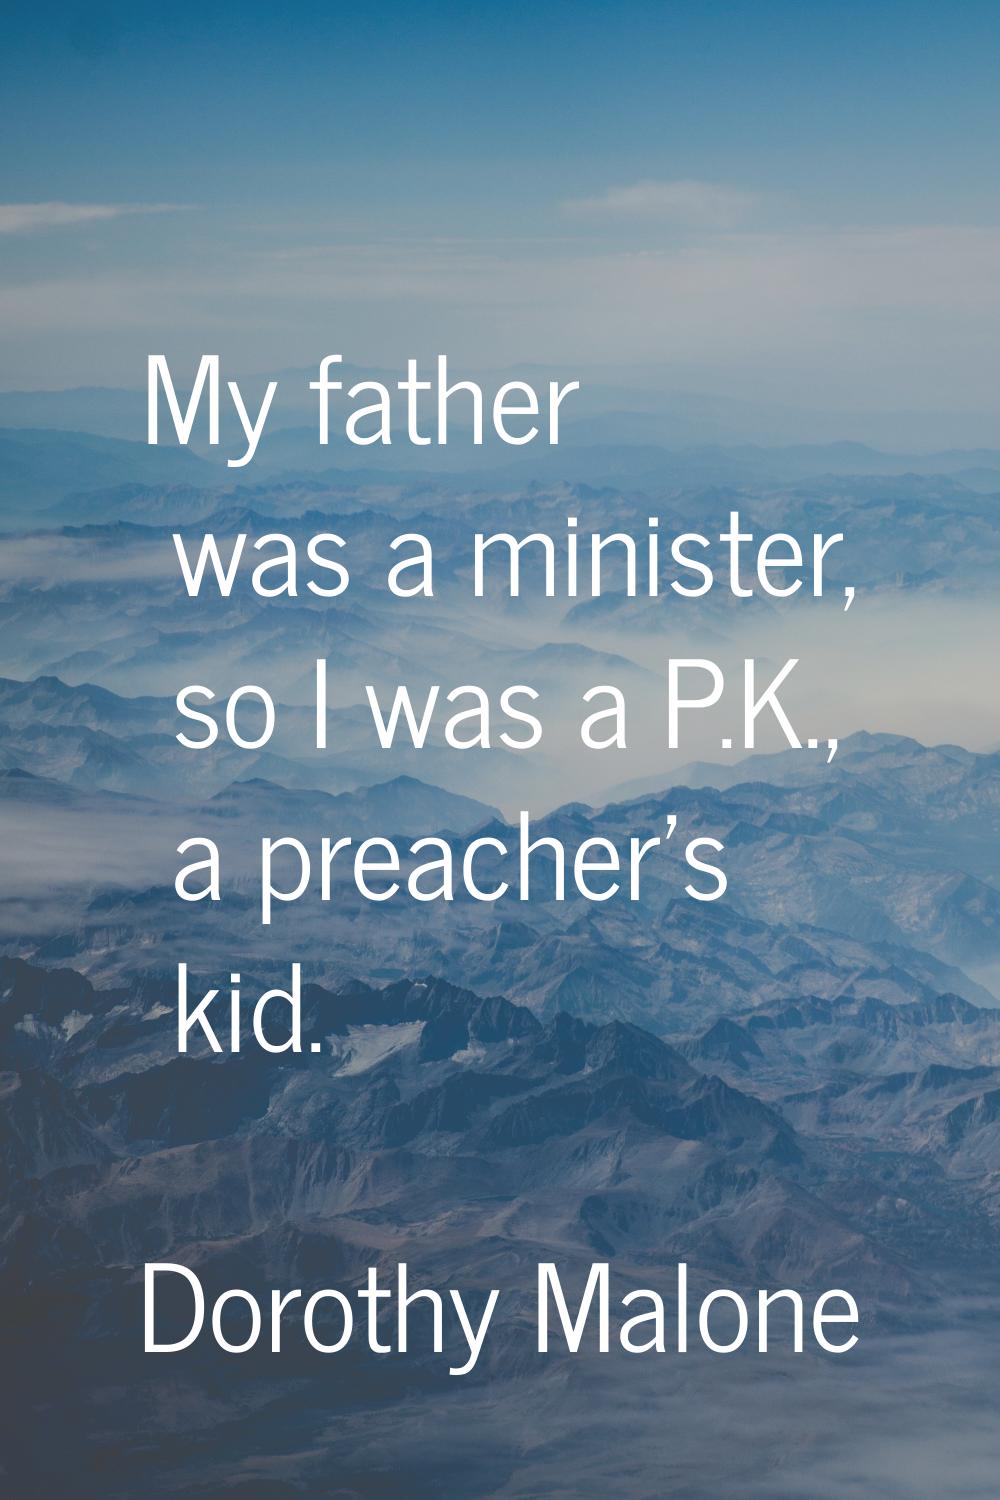 My father was a minister, so I was a P.K., a preacher's kid.